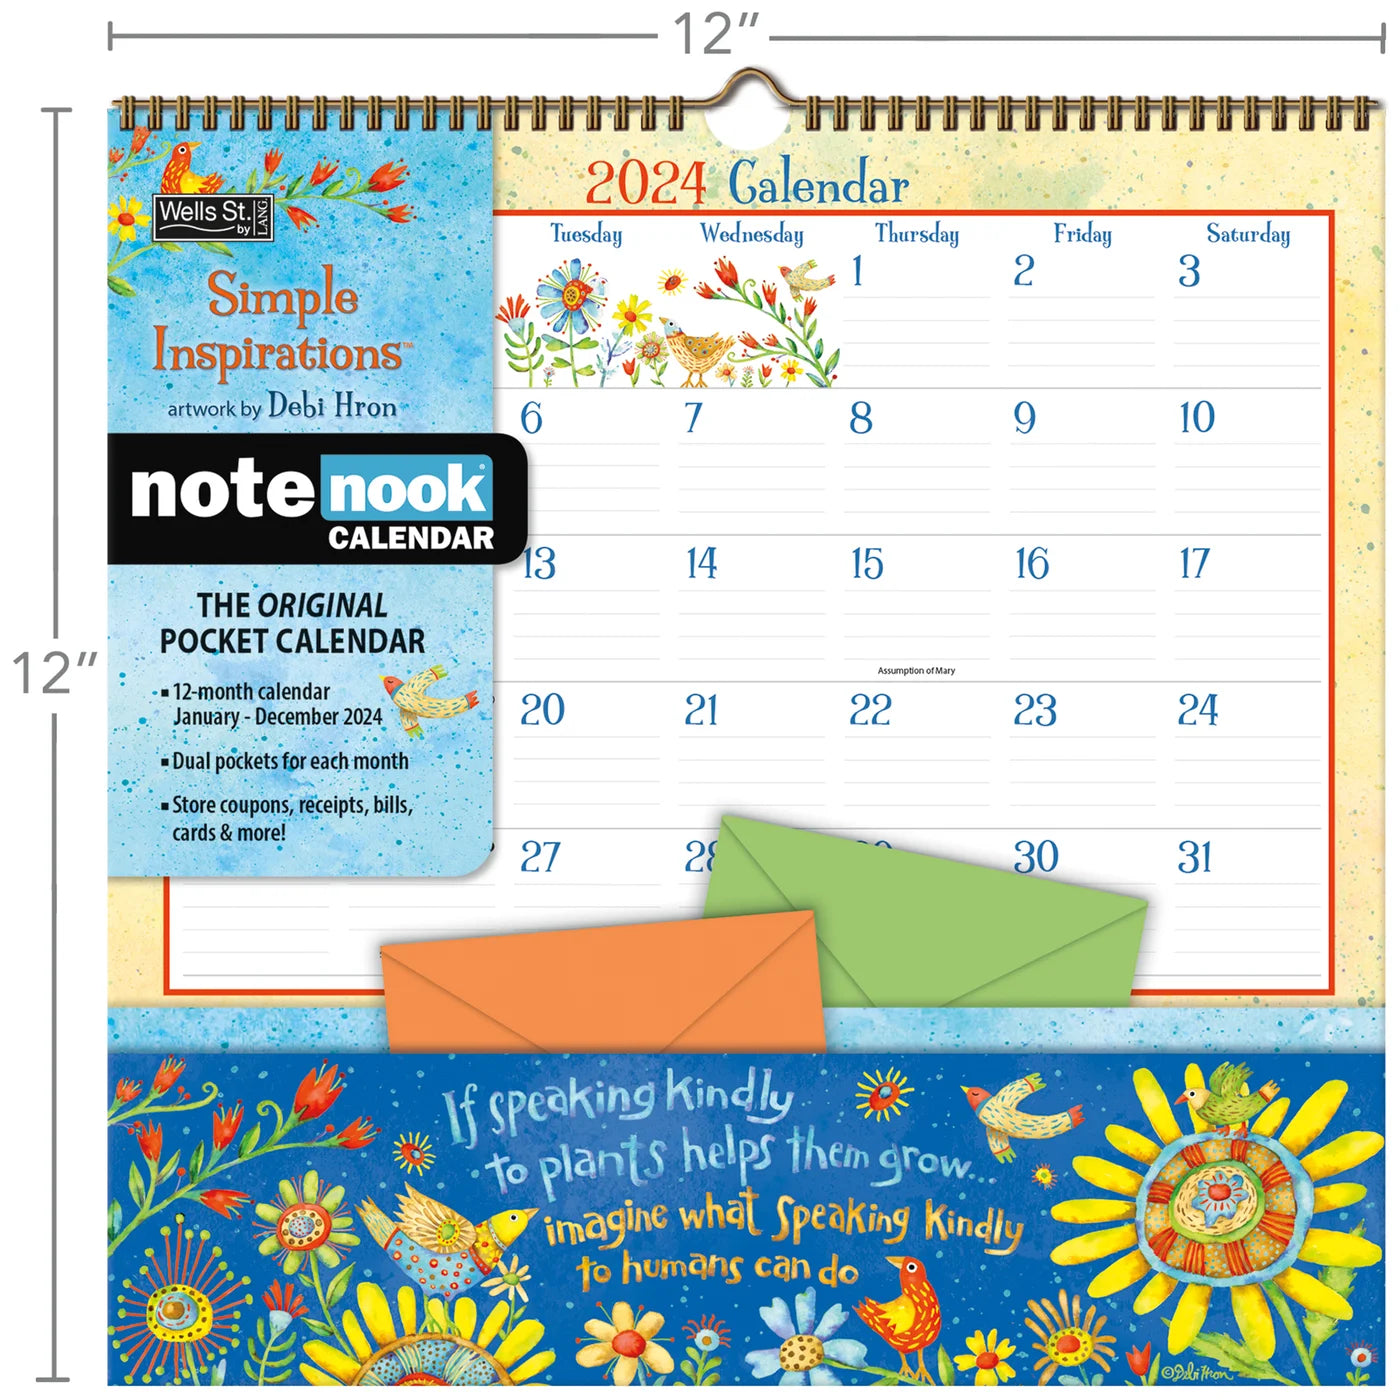 2024 Simple Inspirations - Note Nook Square Wall Calendar